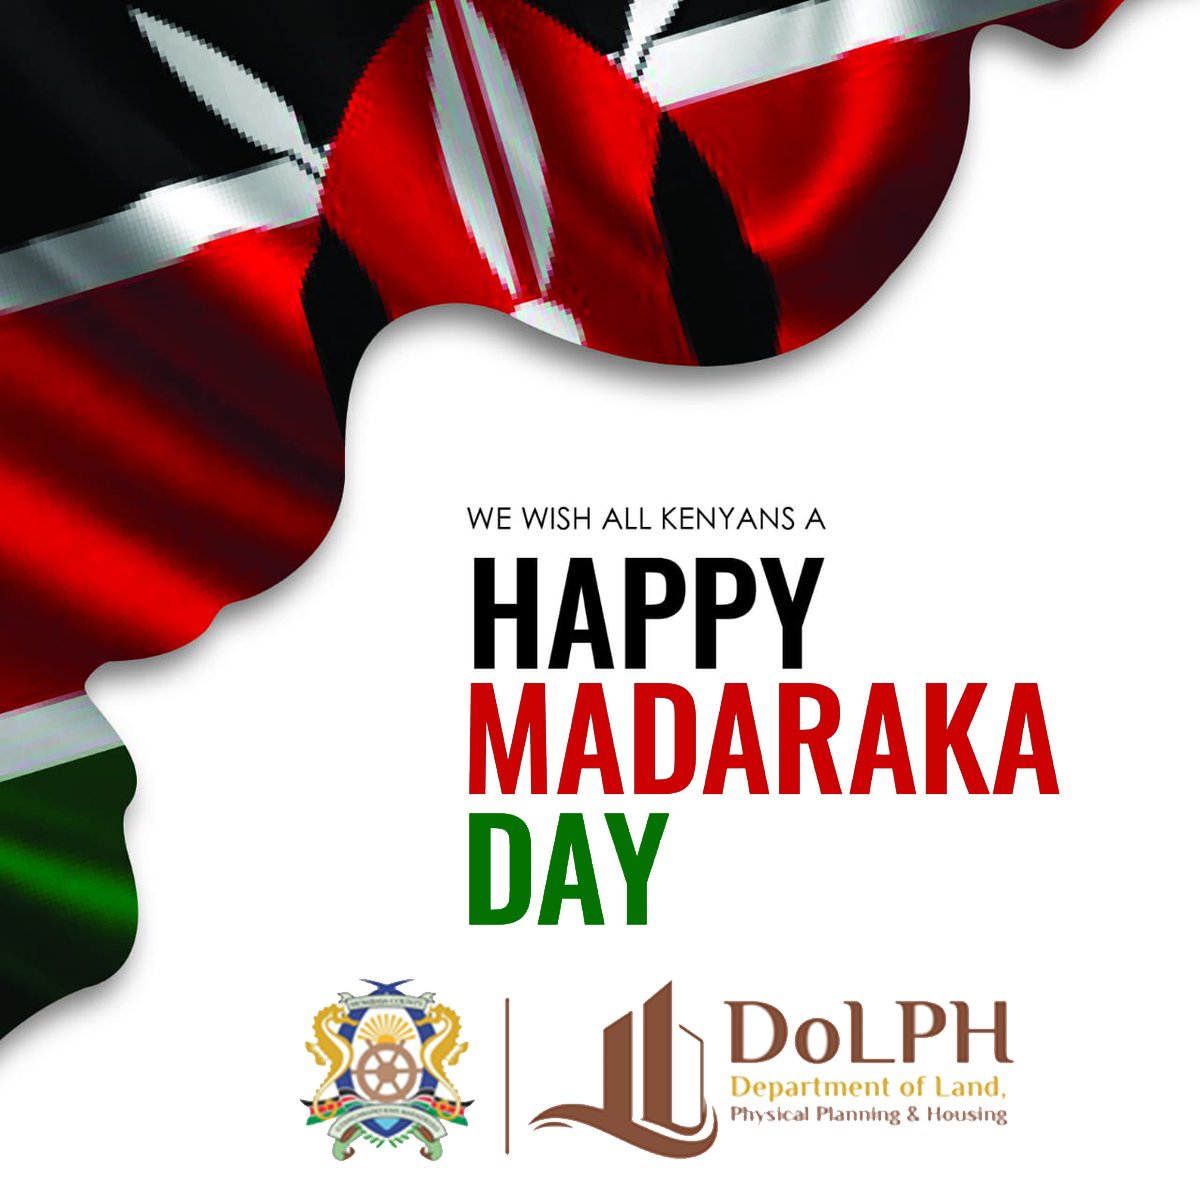 Happy Madaraka day to all. May this celebration of independence be marked with peaceful coexistence and good neighbourliness amongst ourselves. HAPPY MADARAKA DAY #MadarakaDay #madarakaday2022 #Mombasa #DoLPH.